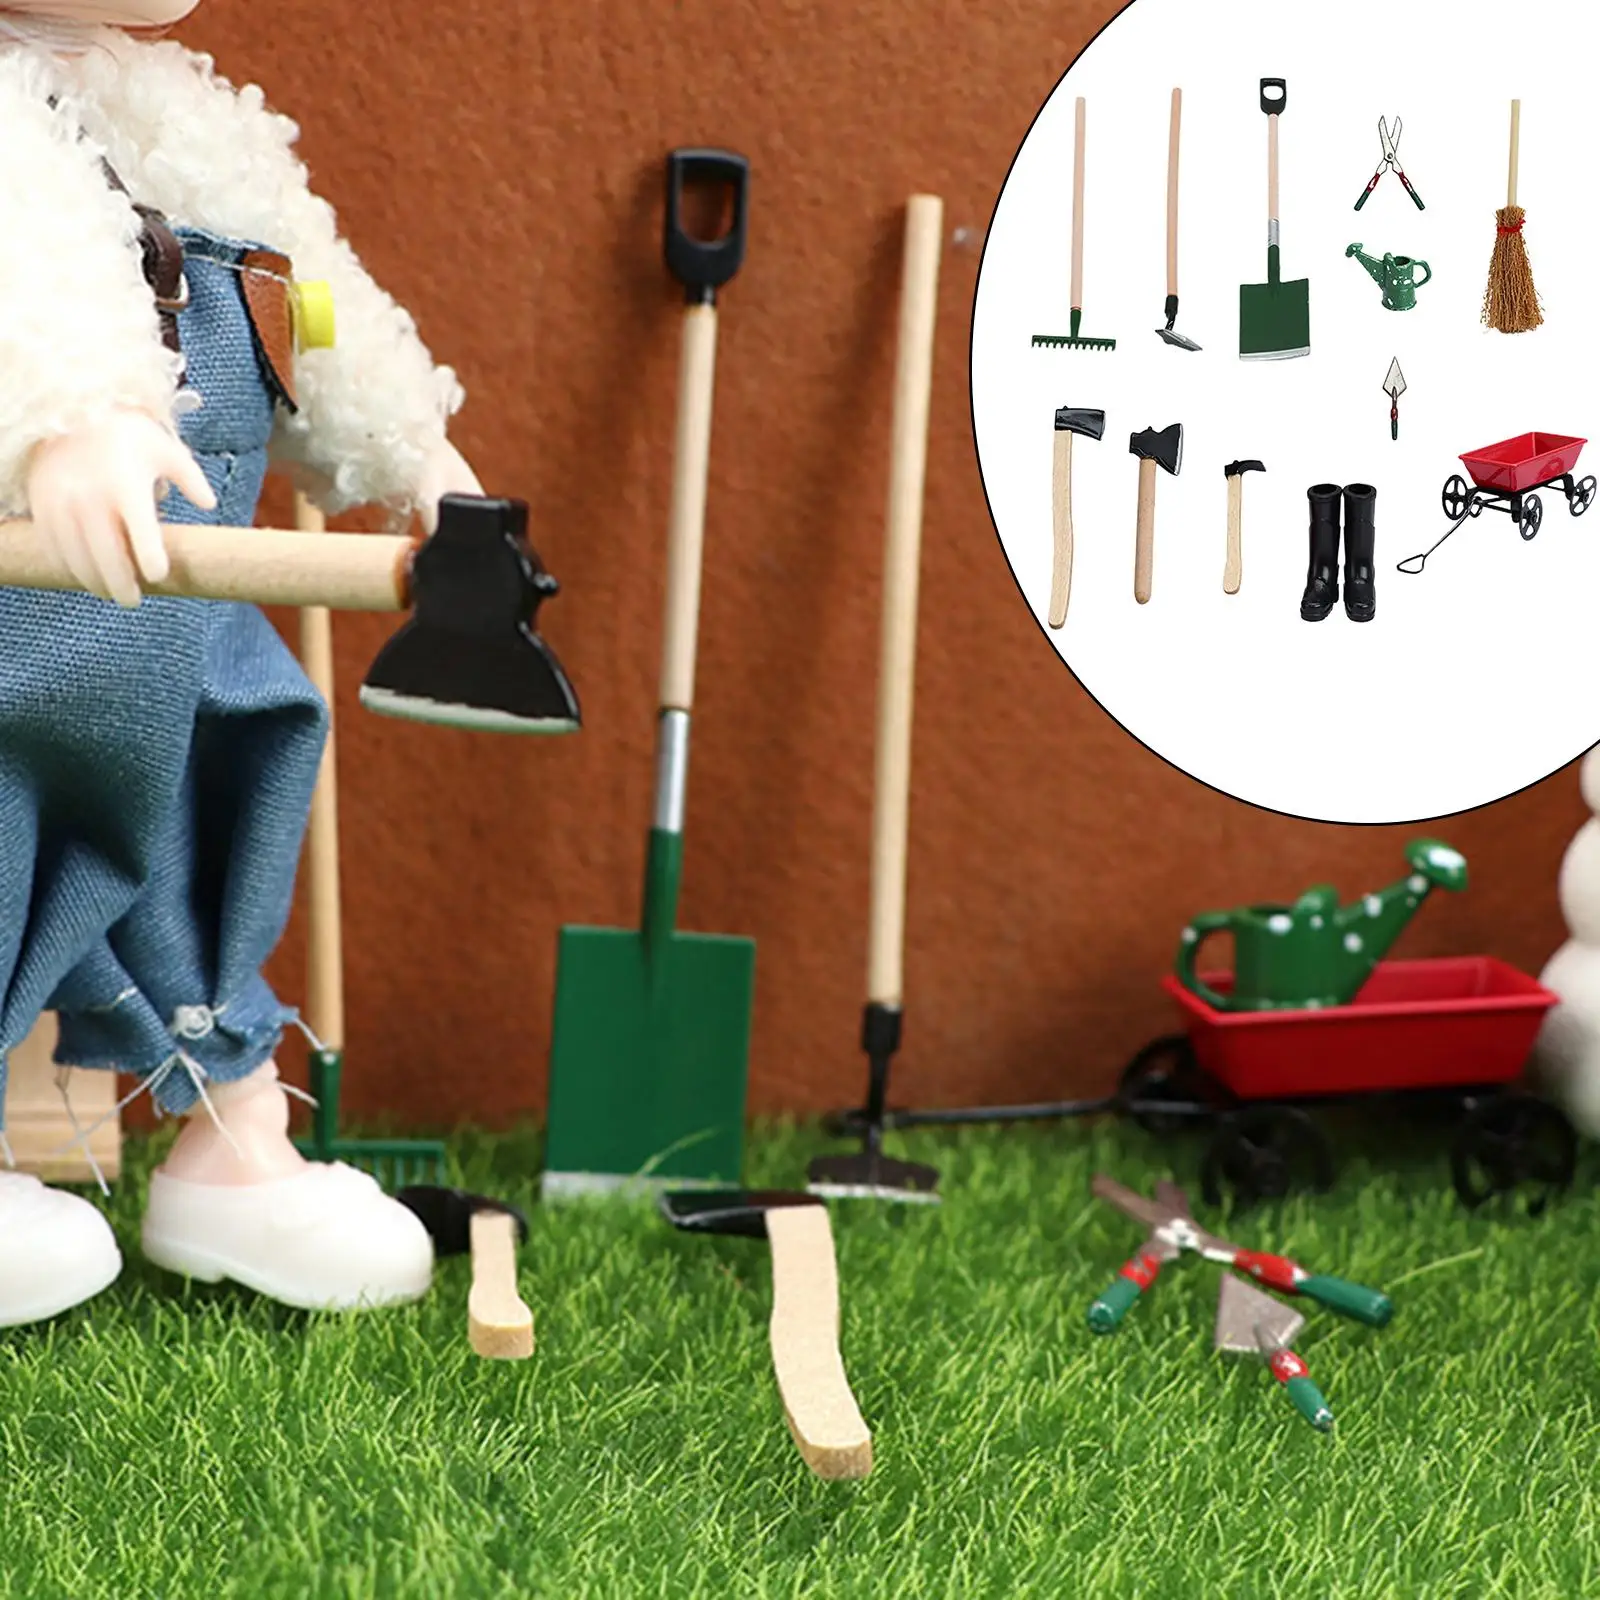 Miniature Garden Tools Pretend Play Ornament for Educational Toy Gardening